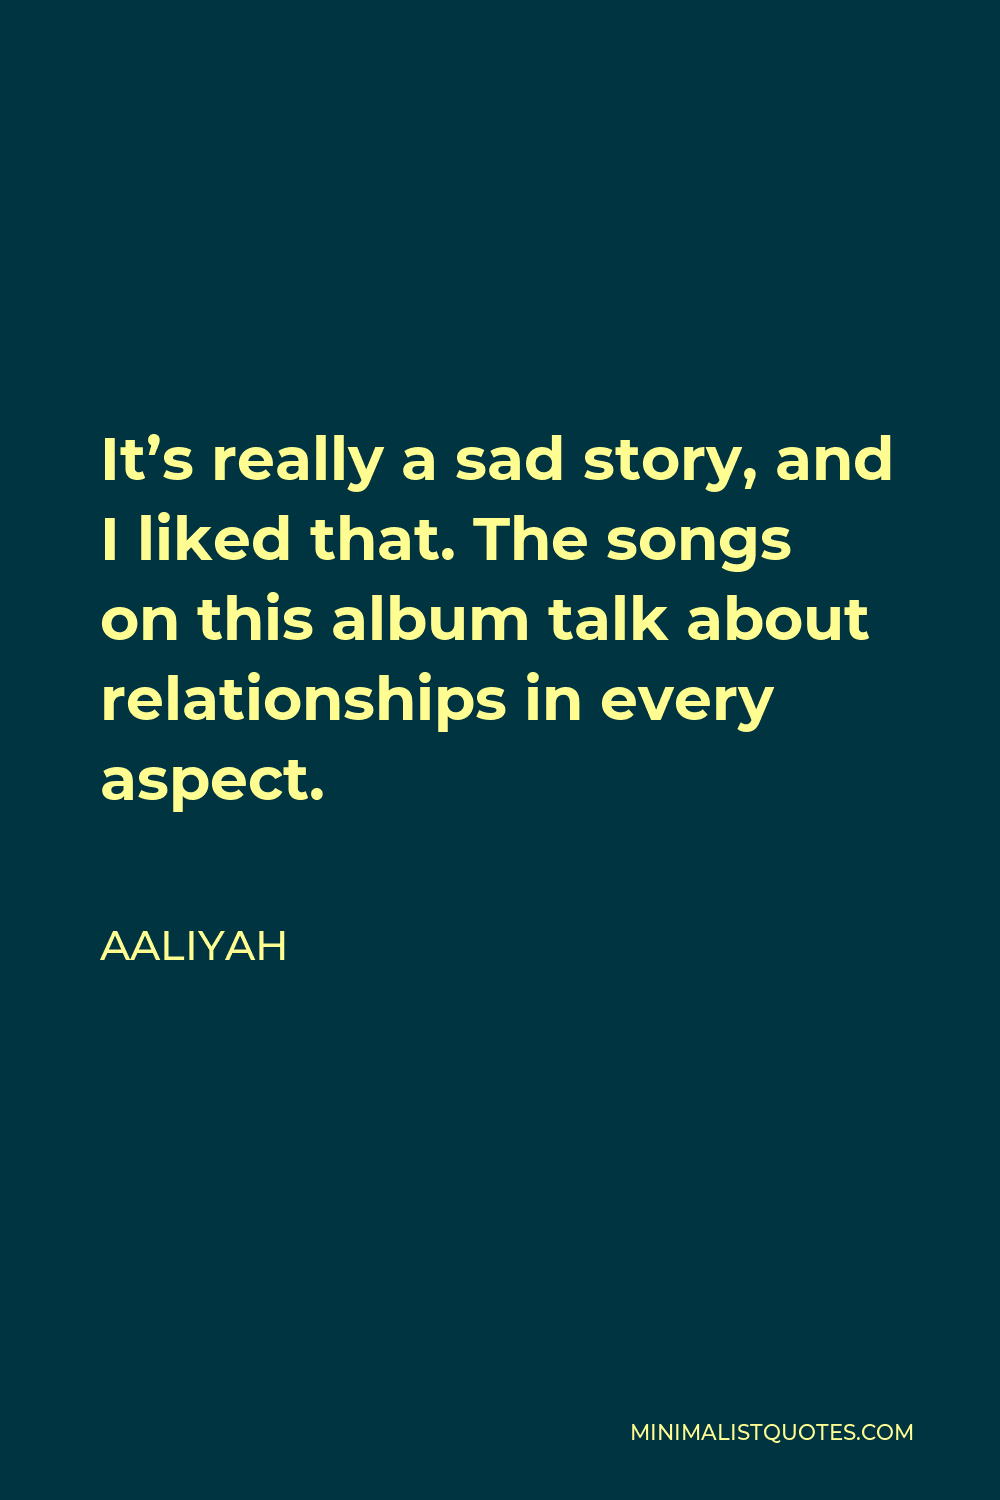 Aaliyah Quote - It’s really a sad story, and I liked that. The songs on this album talk about relationships in every aspect.